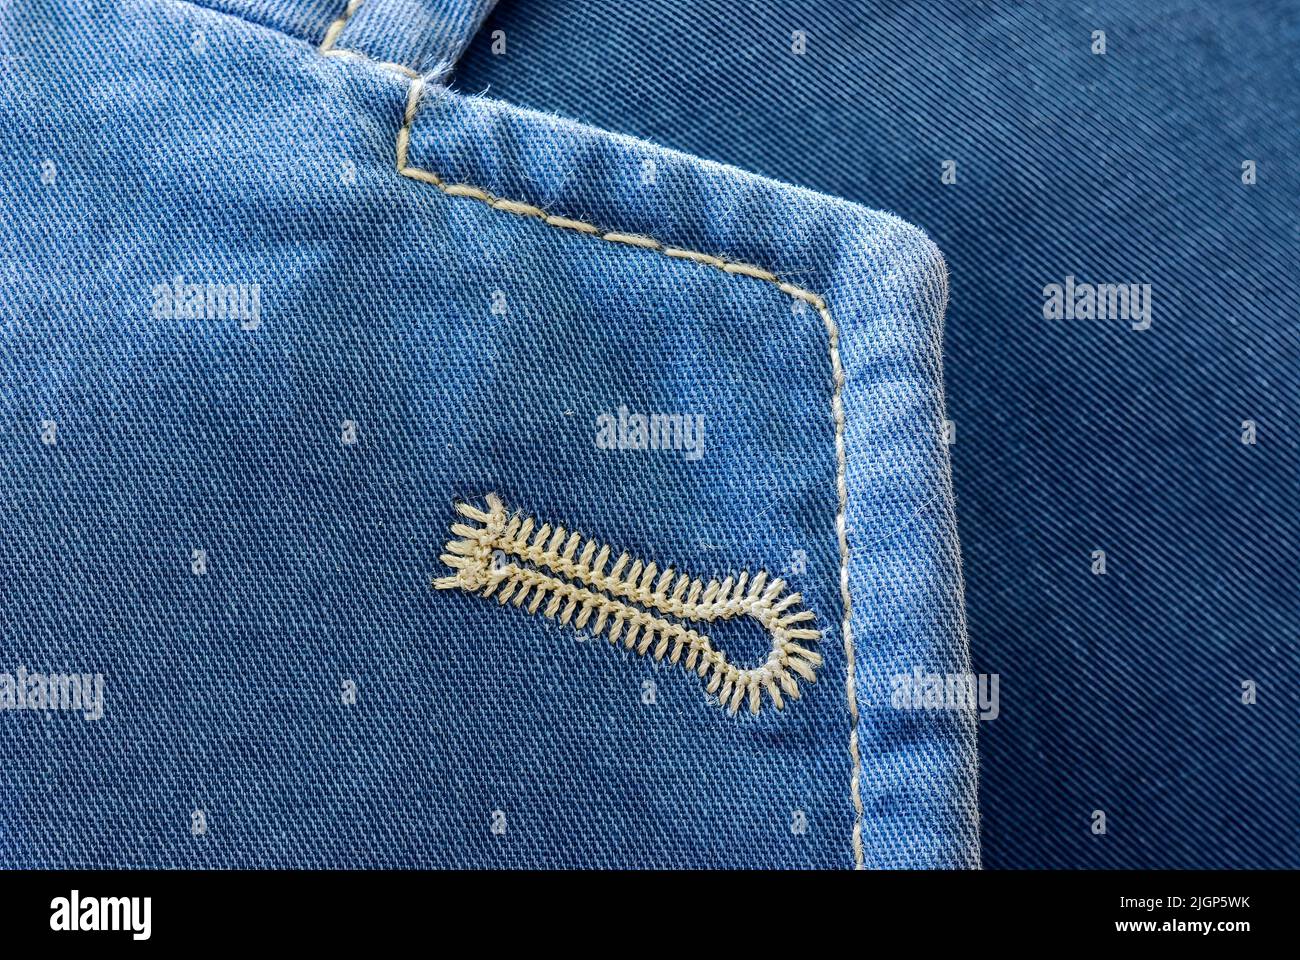 Natural white buttonhole embroidered on a blue cotton sports jacket, peaked lapel, closeup. Background. Stock Photo